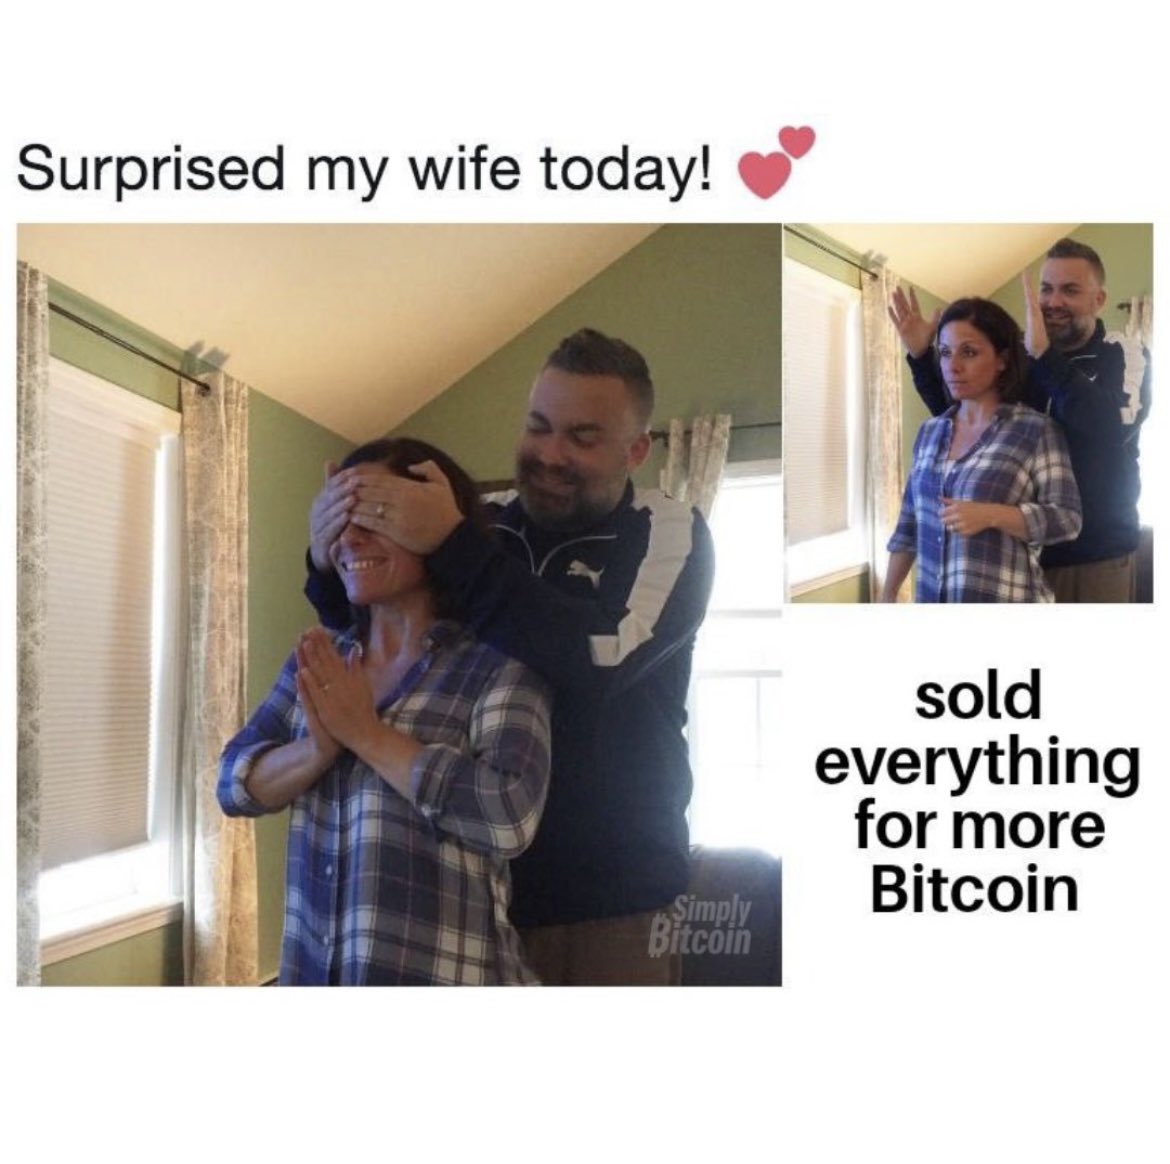 Surprised my wife today!
Simply
Bitcoin
sold
everything
for more
Bitcoin